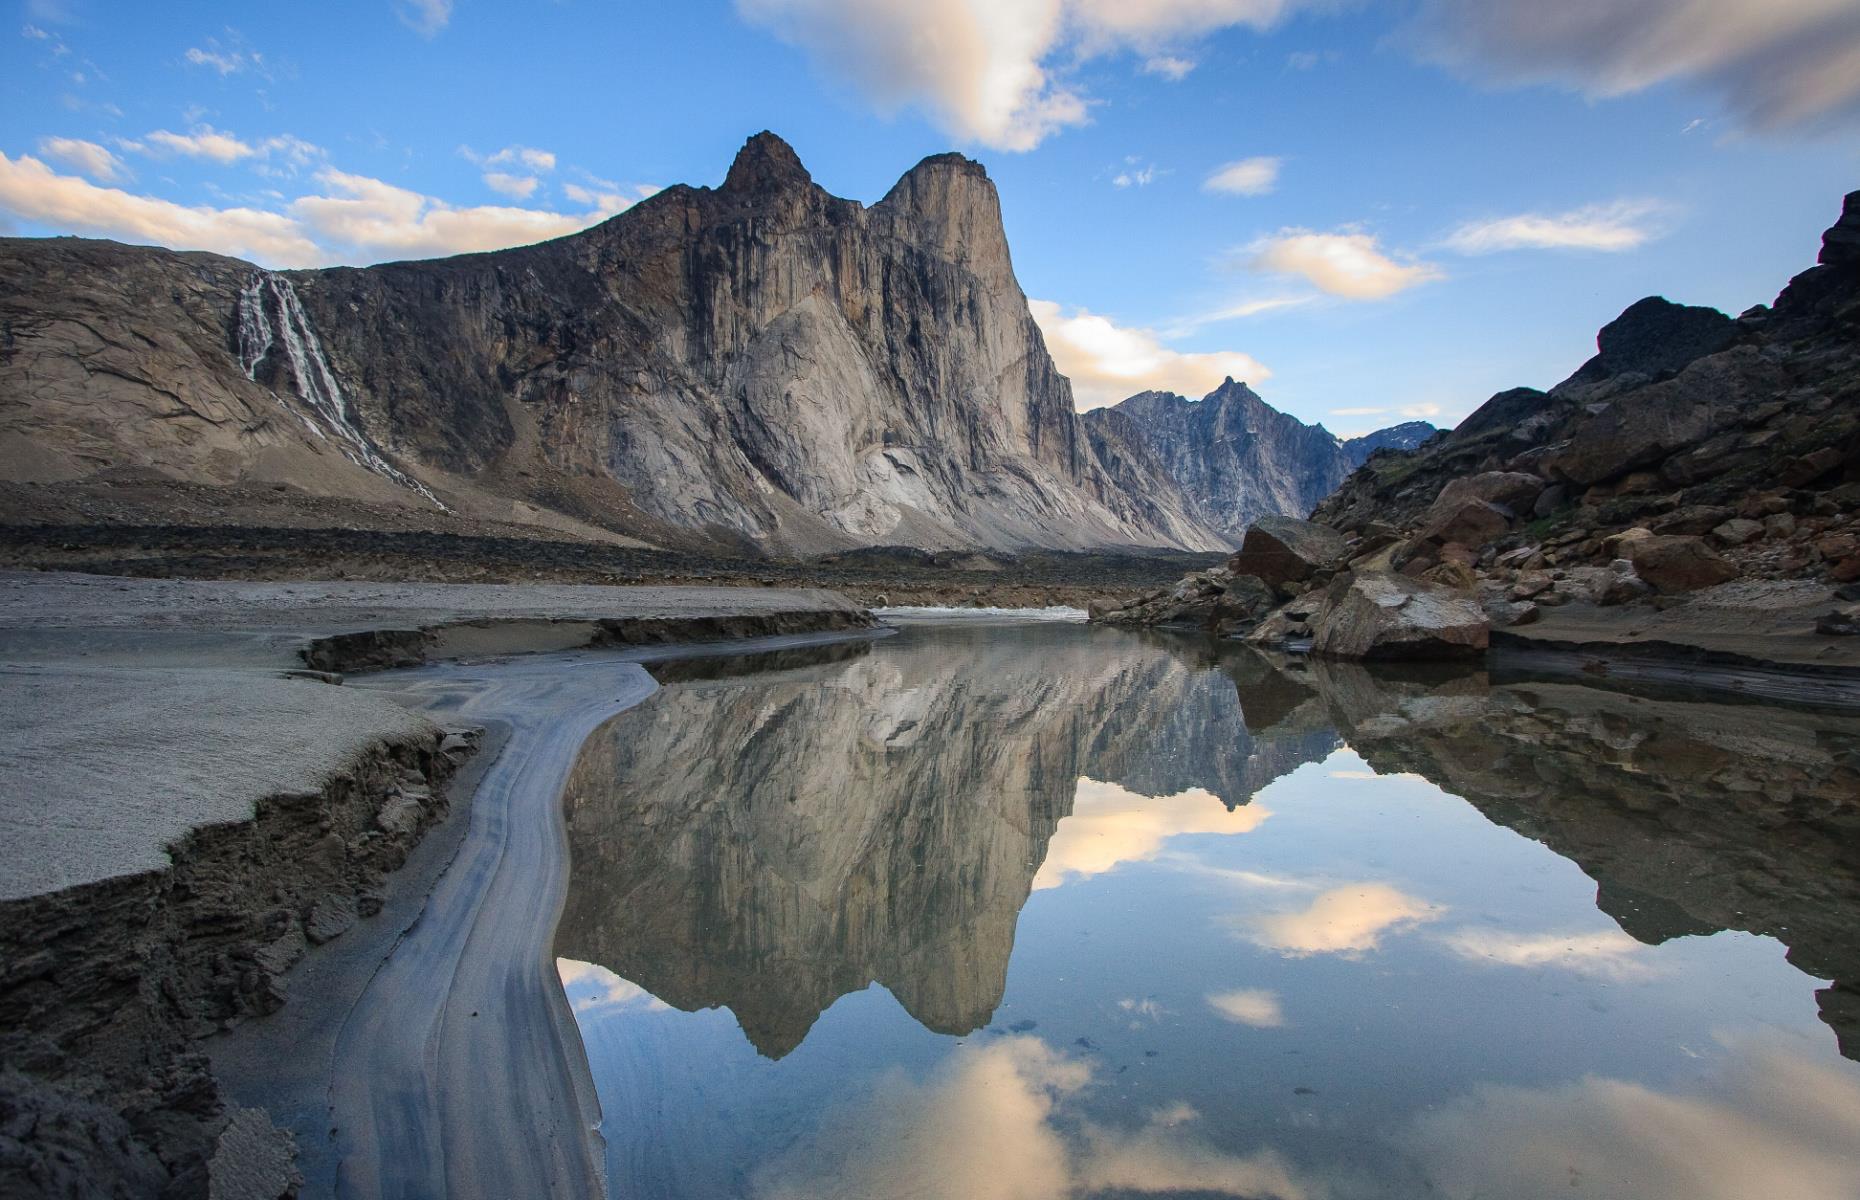 <p>One of the largest islands in the world, Baffin Island is easy to spot on a globe, but its far-north location can make it challenging to reach. The island’s <a href="https://www.pc.gc.ca/en/pn-np/nu/auyuittuq">Auyuittuq National Park</a> offers a prime view of Canada’s incredible north, with untouched swaths of ancient rock formations and stunning fjords. Visiting features like the Akshayuk Pass is a dream for any adventurer or mountaineer lucky enough to make it to this wild wonderland.</p>